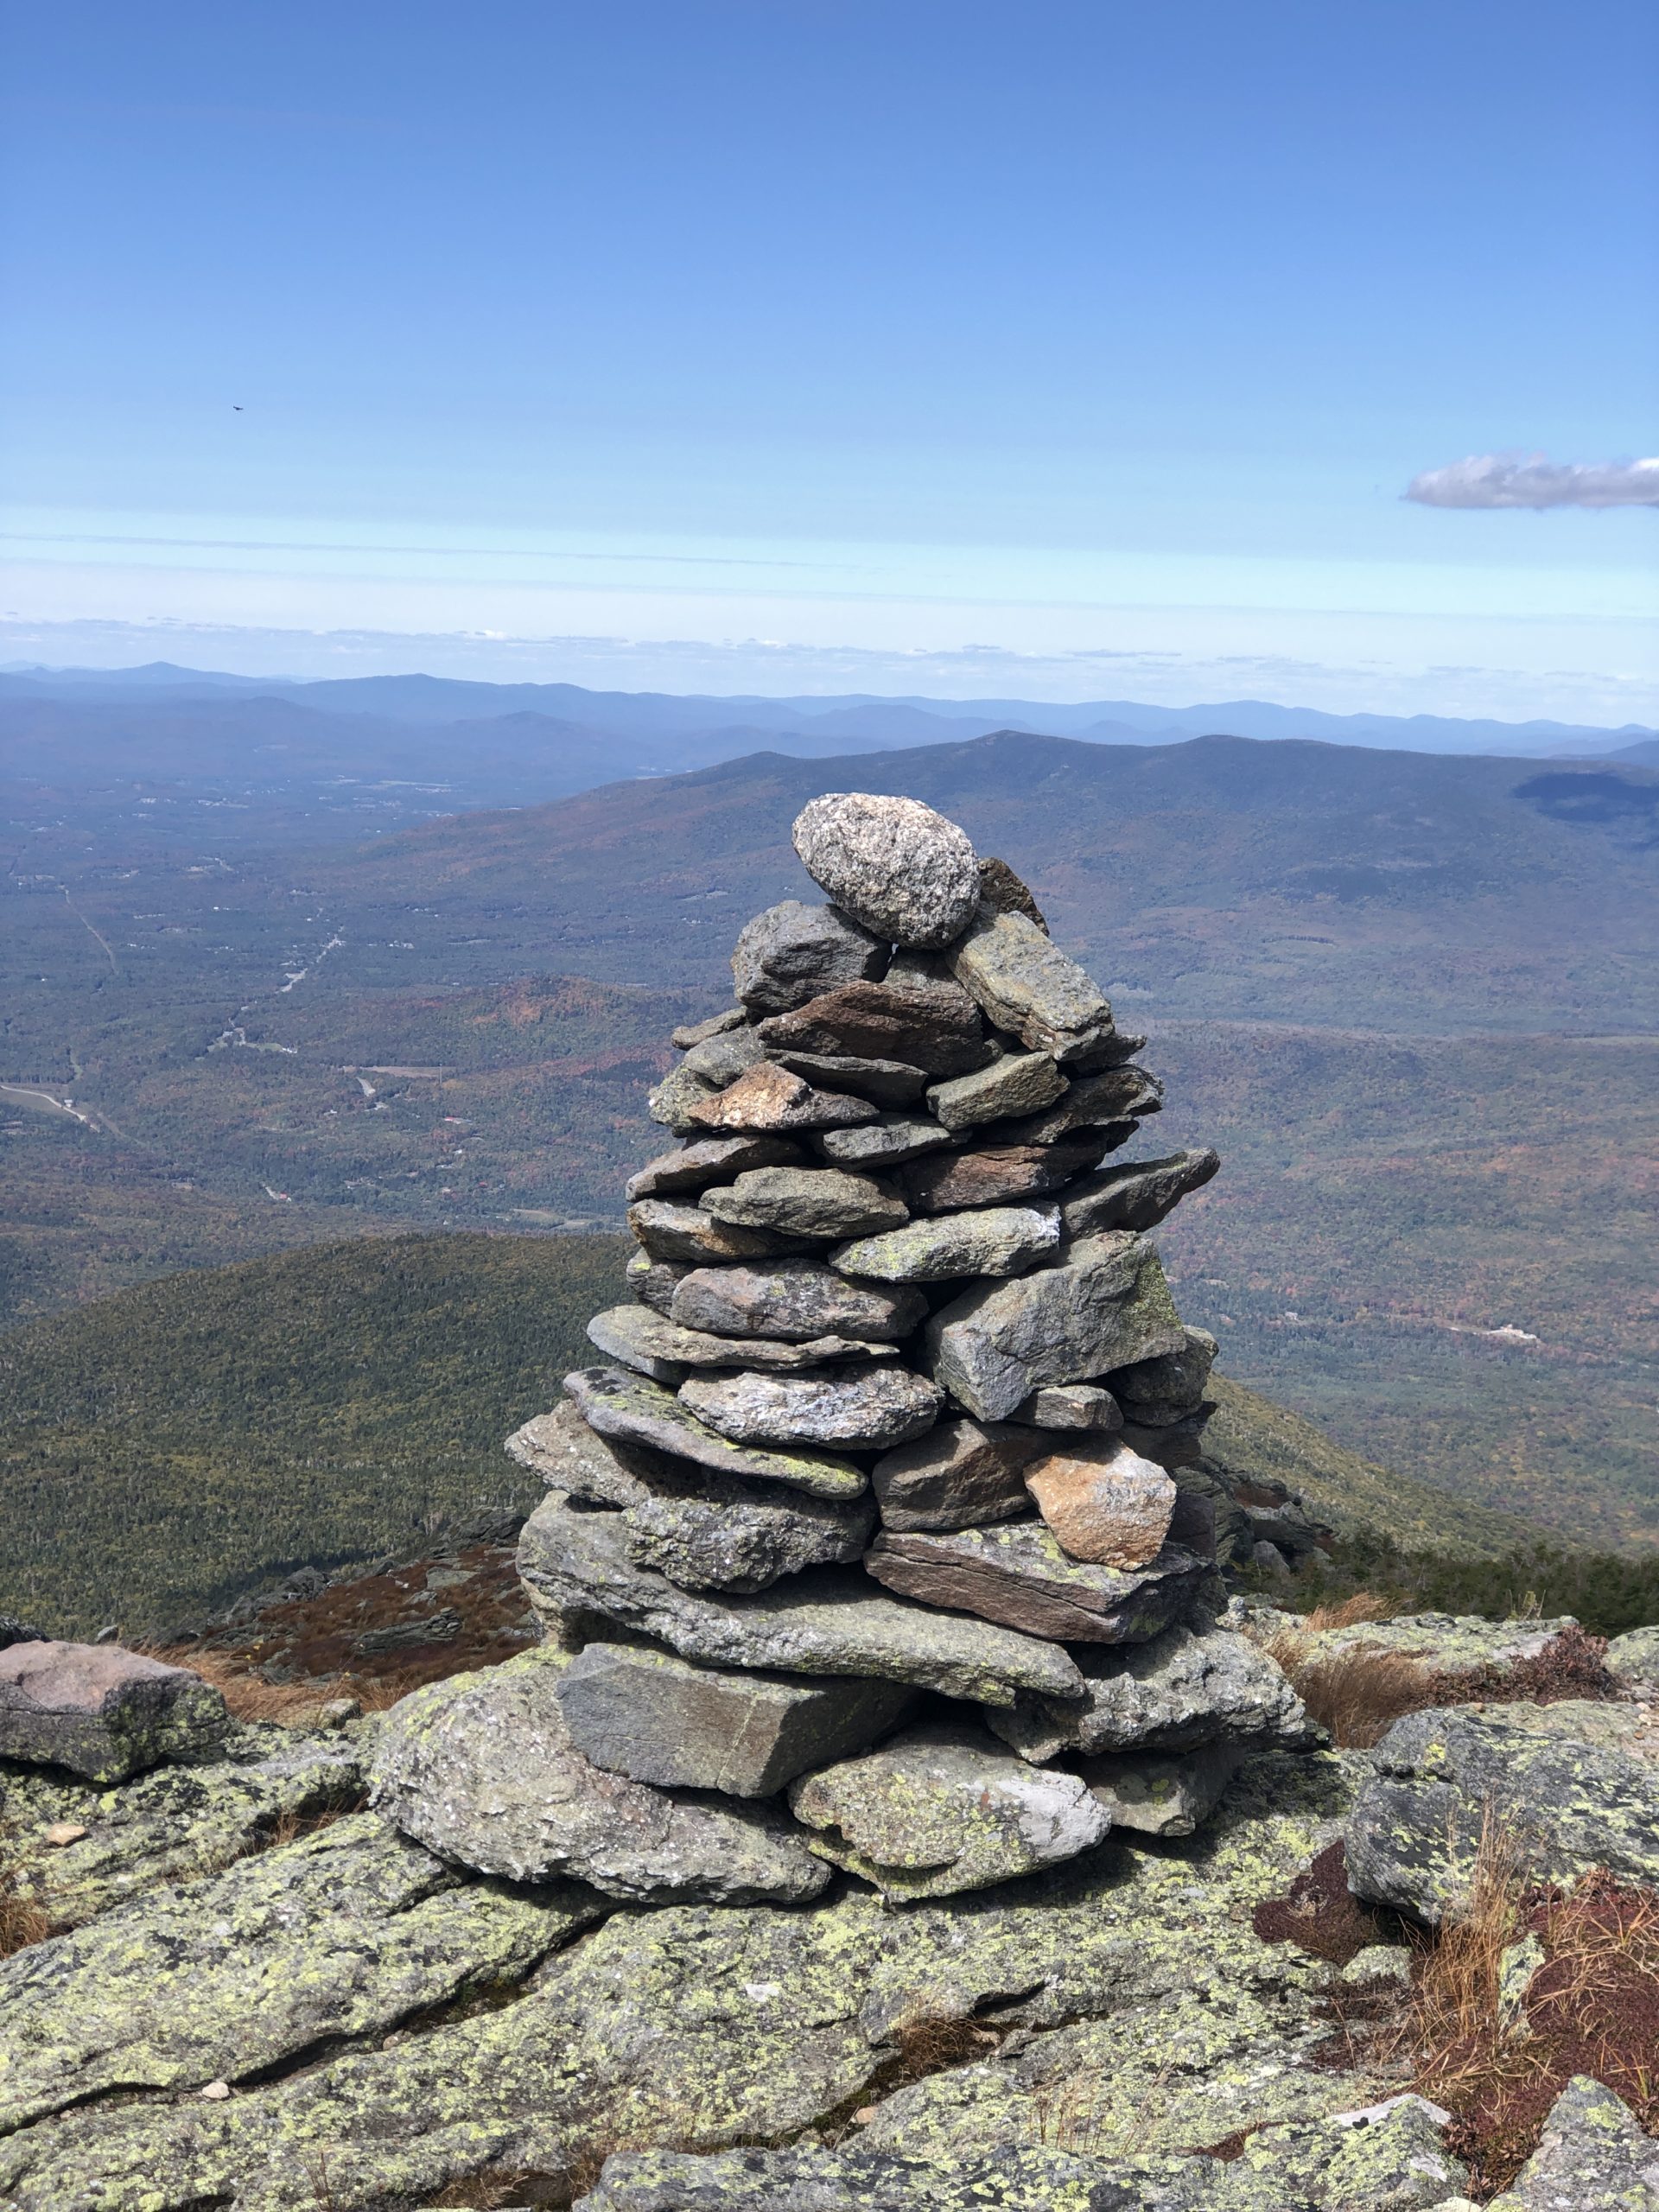 A large rock cairn seen while hiking Mt Jefferson in the White Mountains, New Hampshire